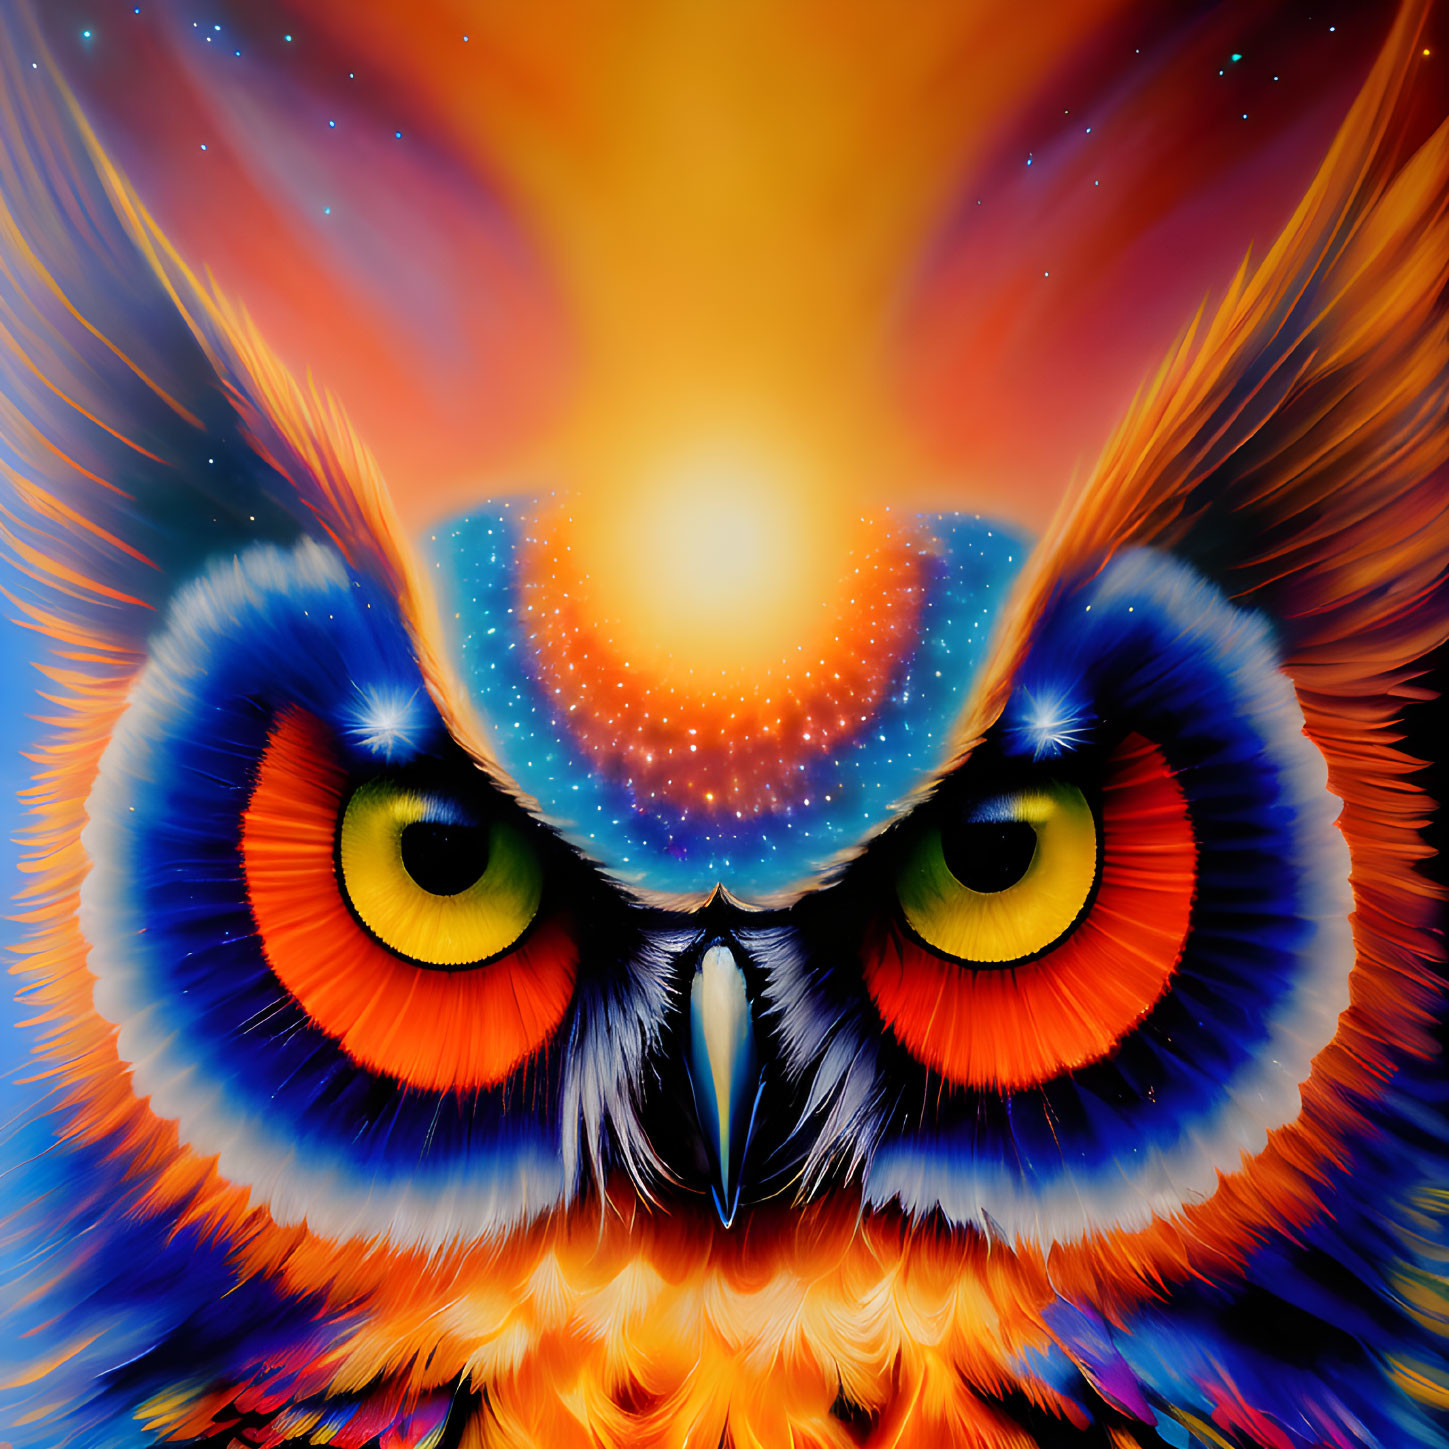 Colorful Cosmic Owl Illustration with Fiery Forehead Glow